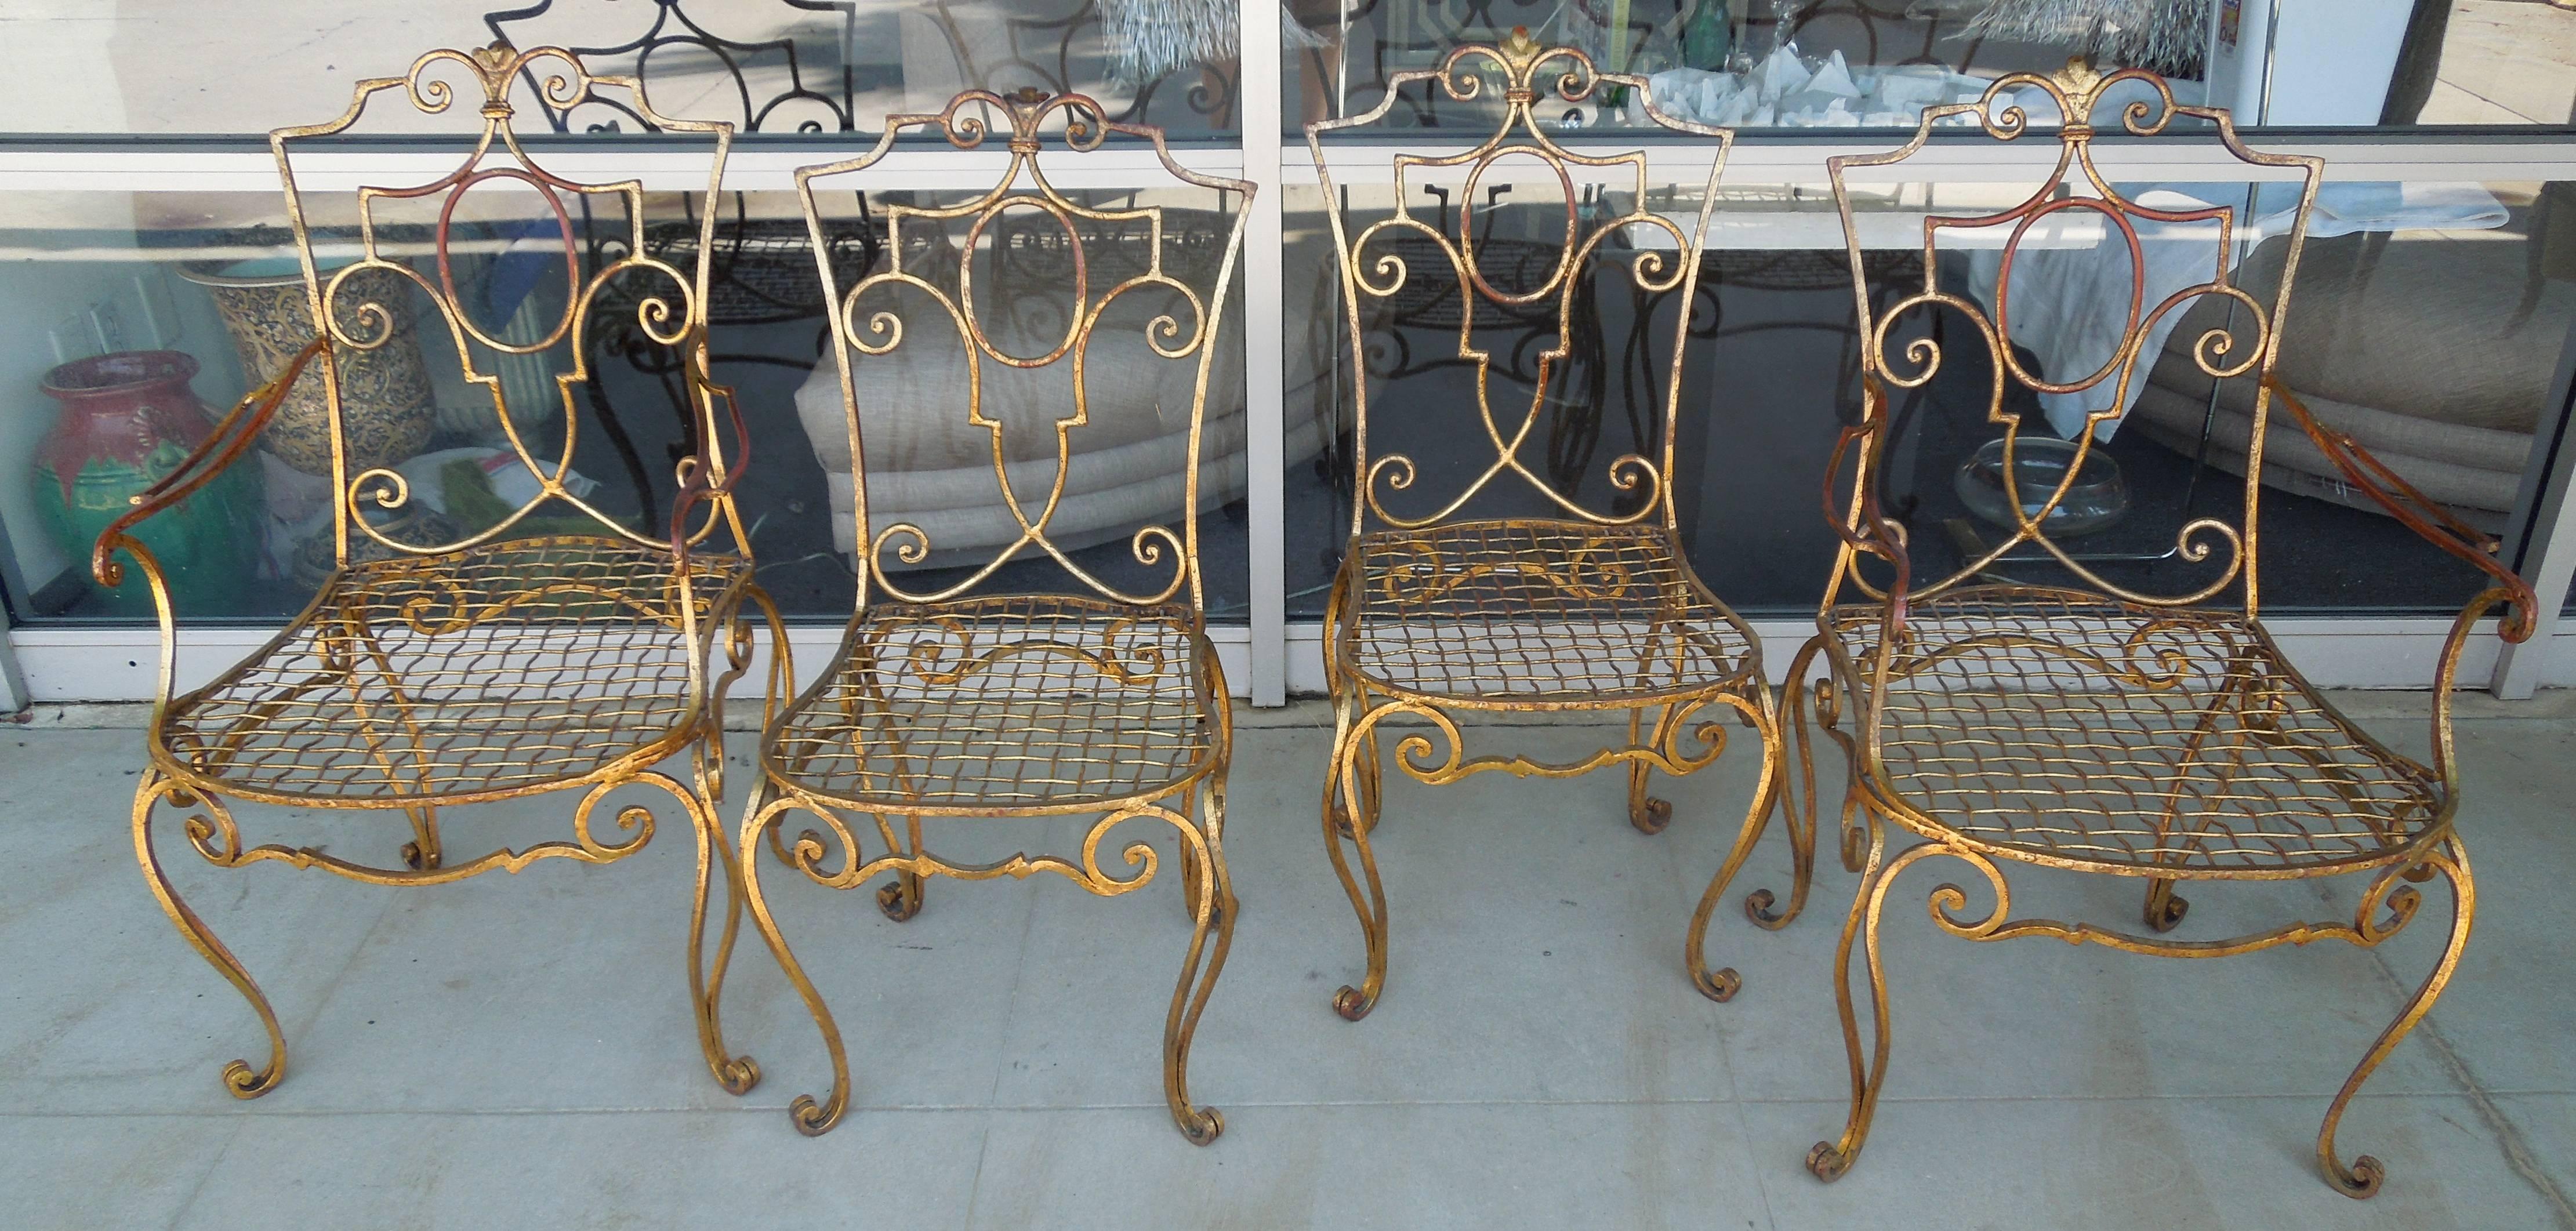 Baroque Revival Jean-Charles Moreux French Moderne Gold Gilt Iron Chairs Set of Four